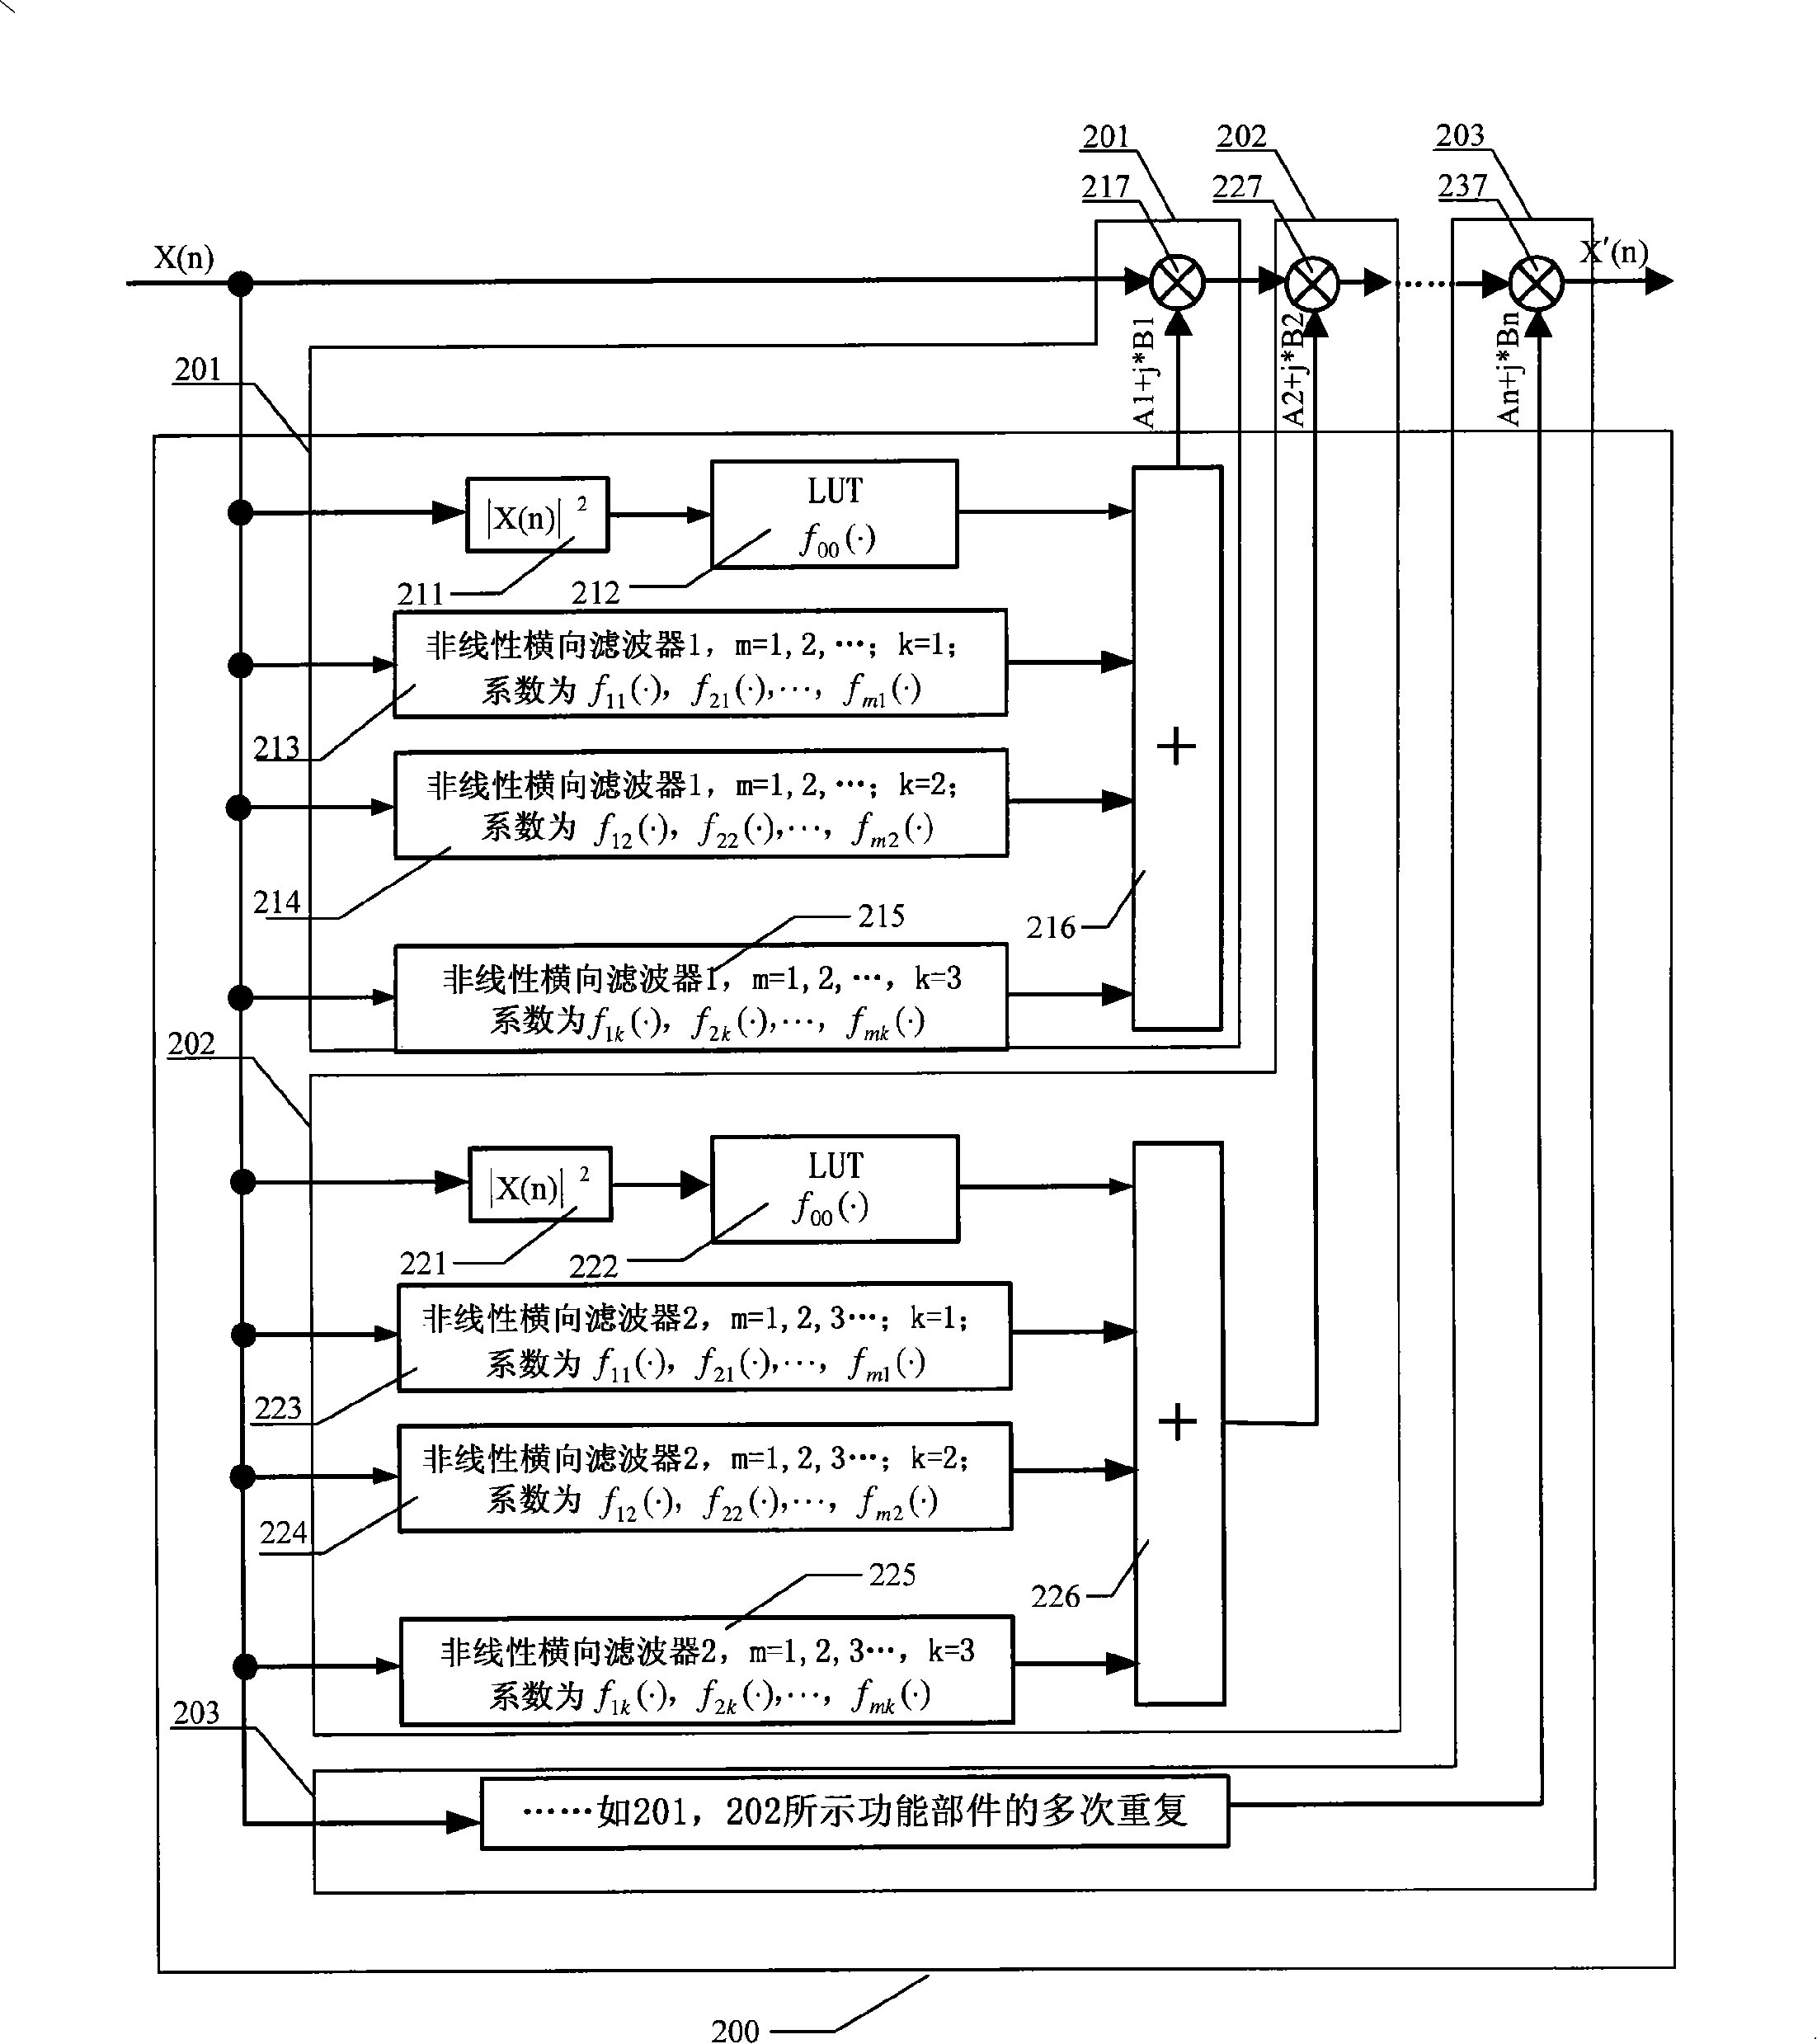 Predistortion model apparatus as well as apparatus, system and method for processing predistortion of signal